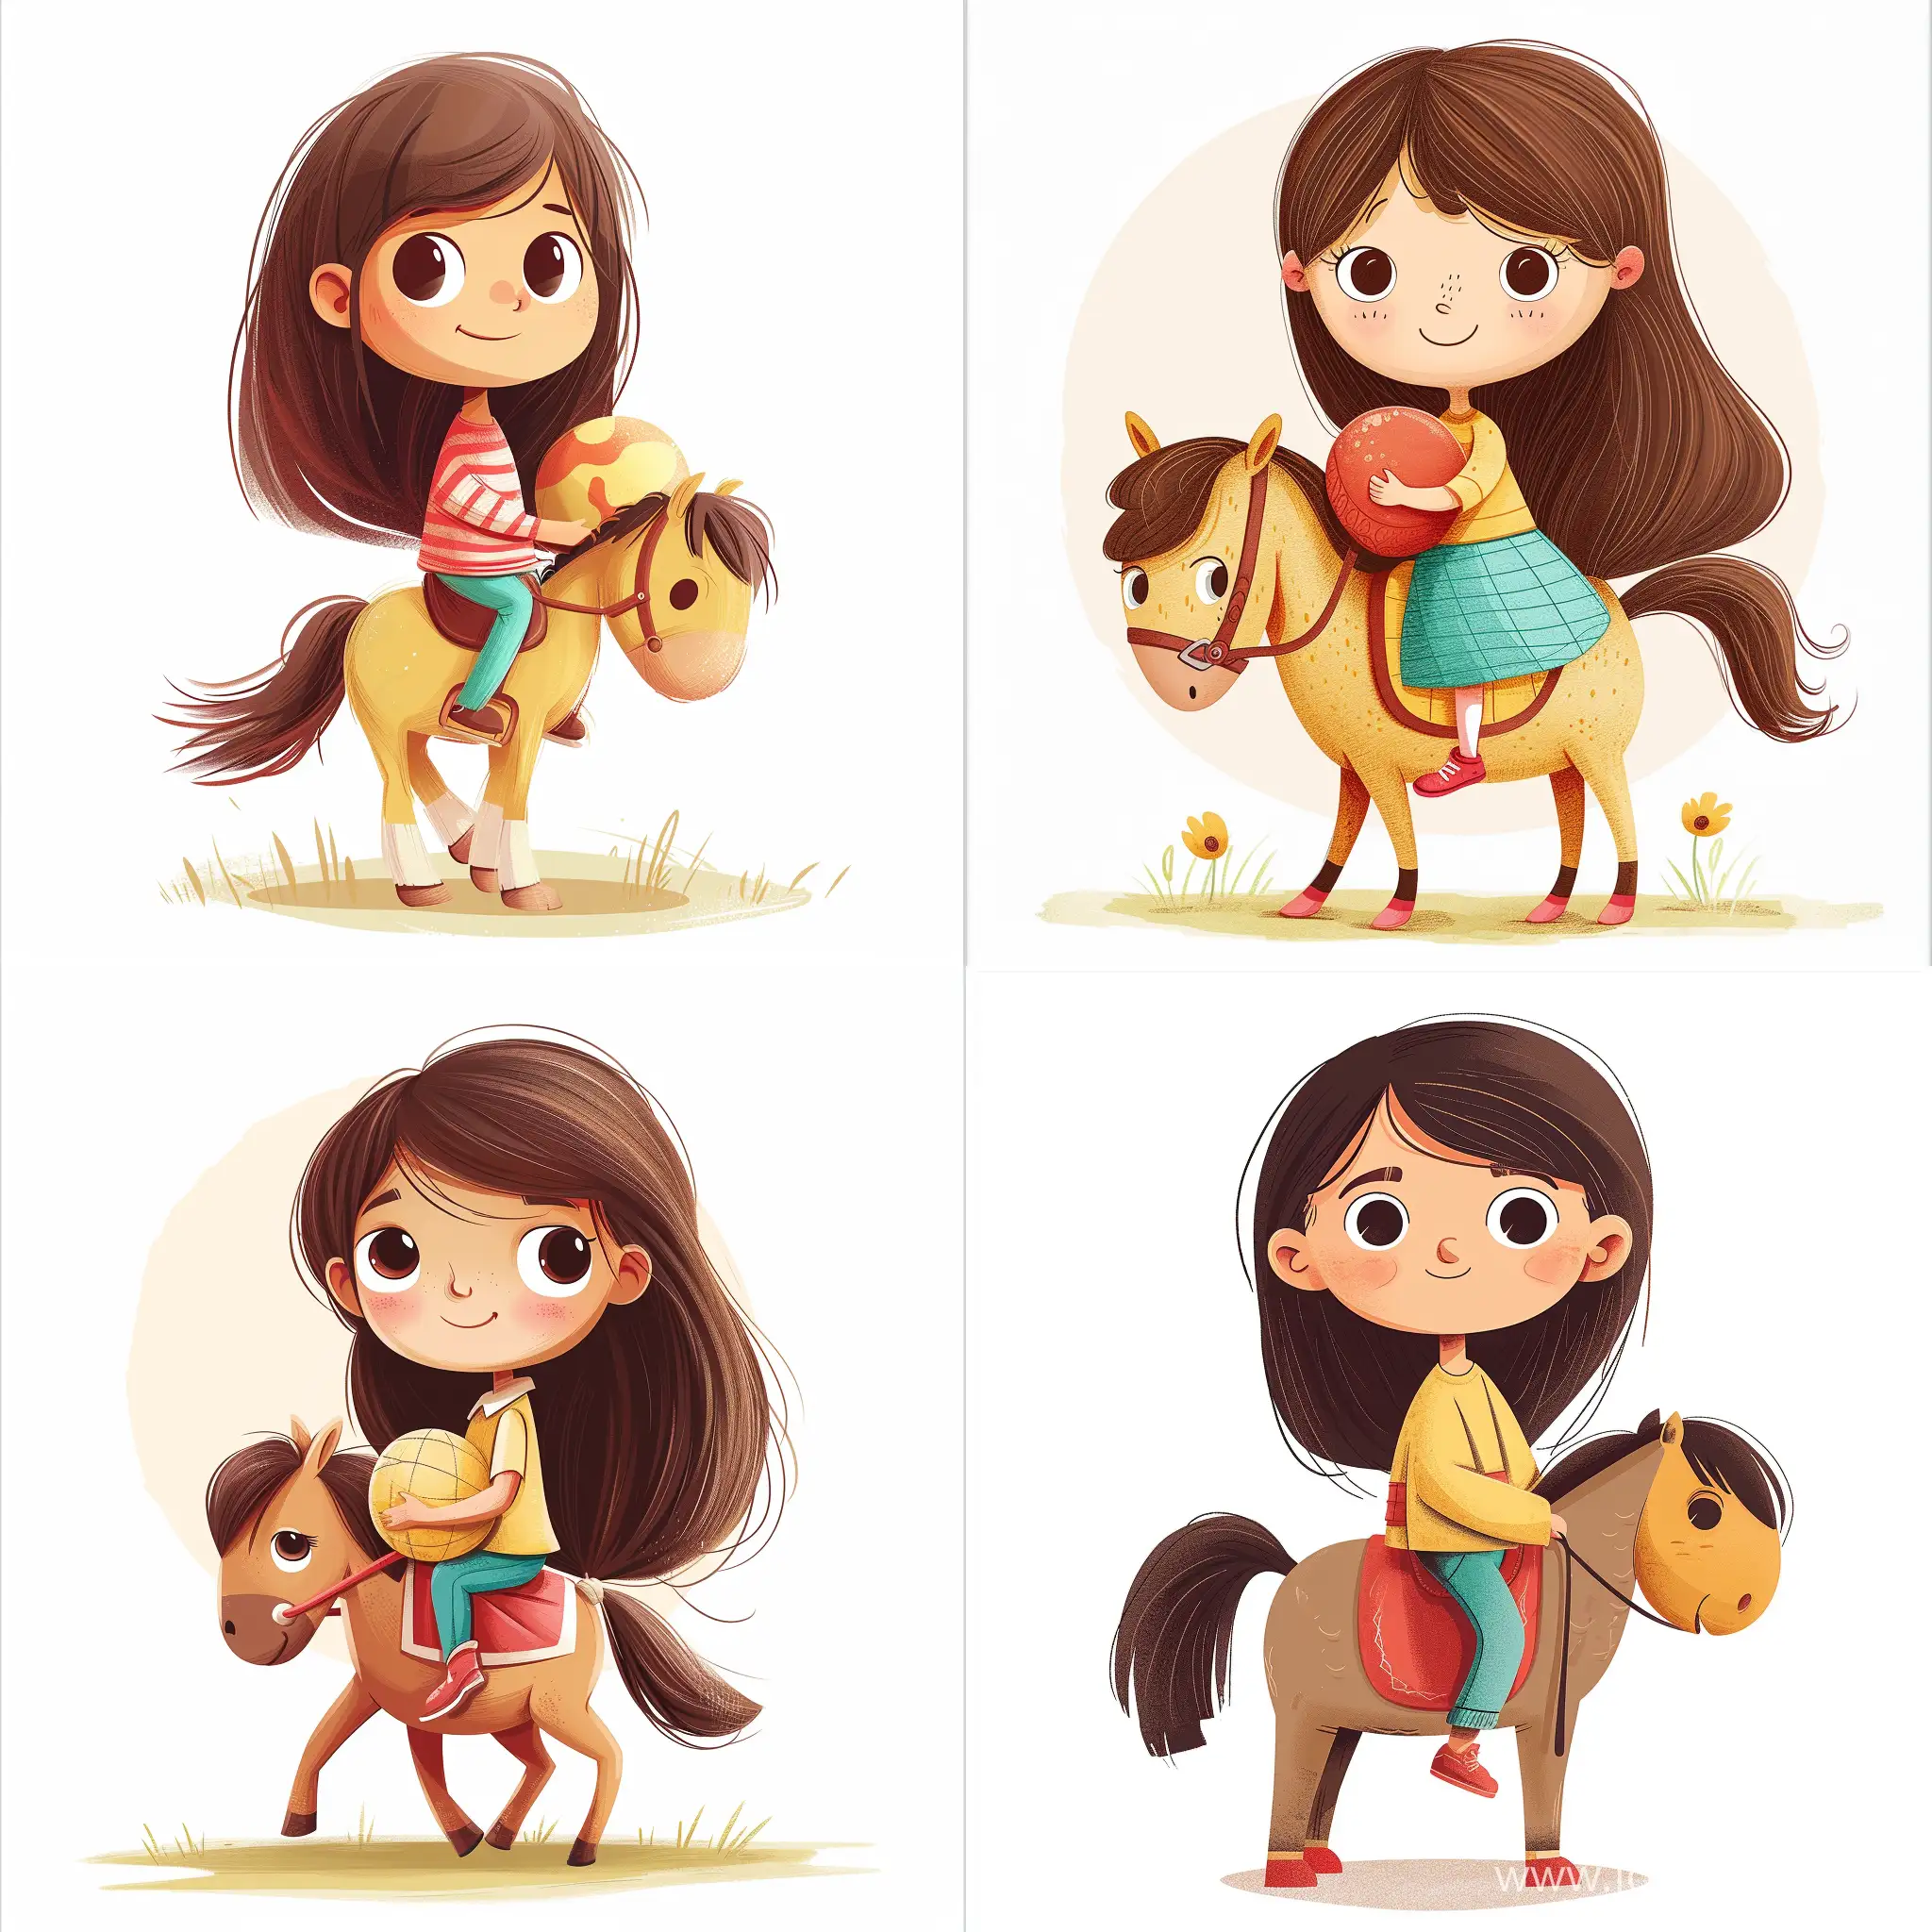 https://static.showit.co/file/YQ9xI9klSPCAe-MWoi8-gA/158095/170747986364663e7fxlw.png cute girl children's book character book illustration riding a horse
